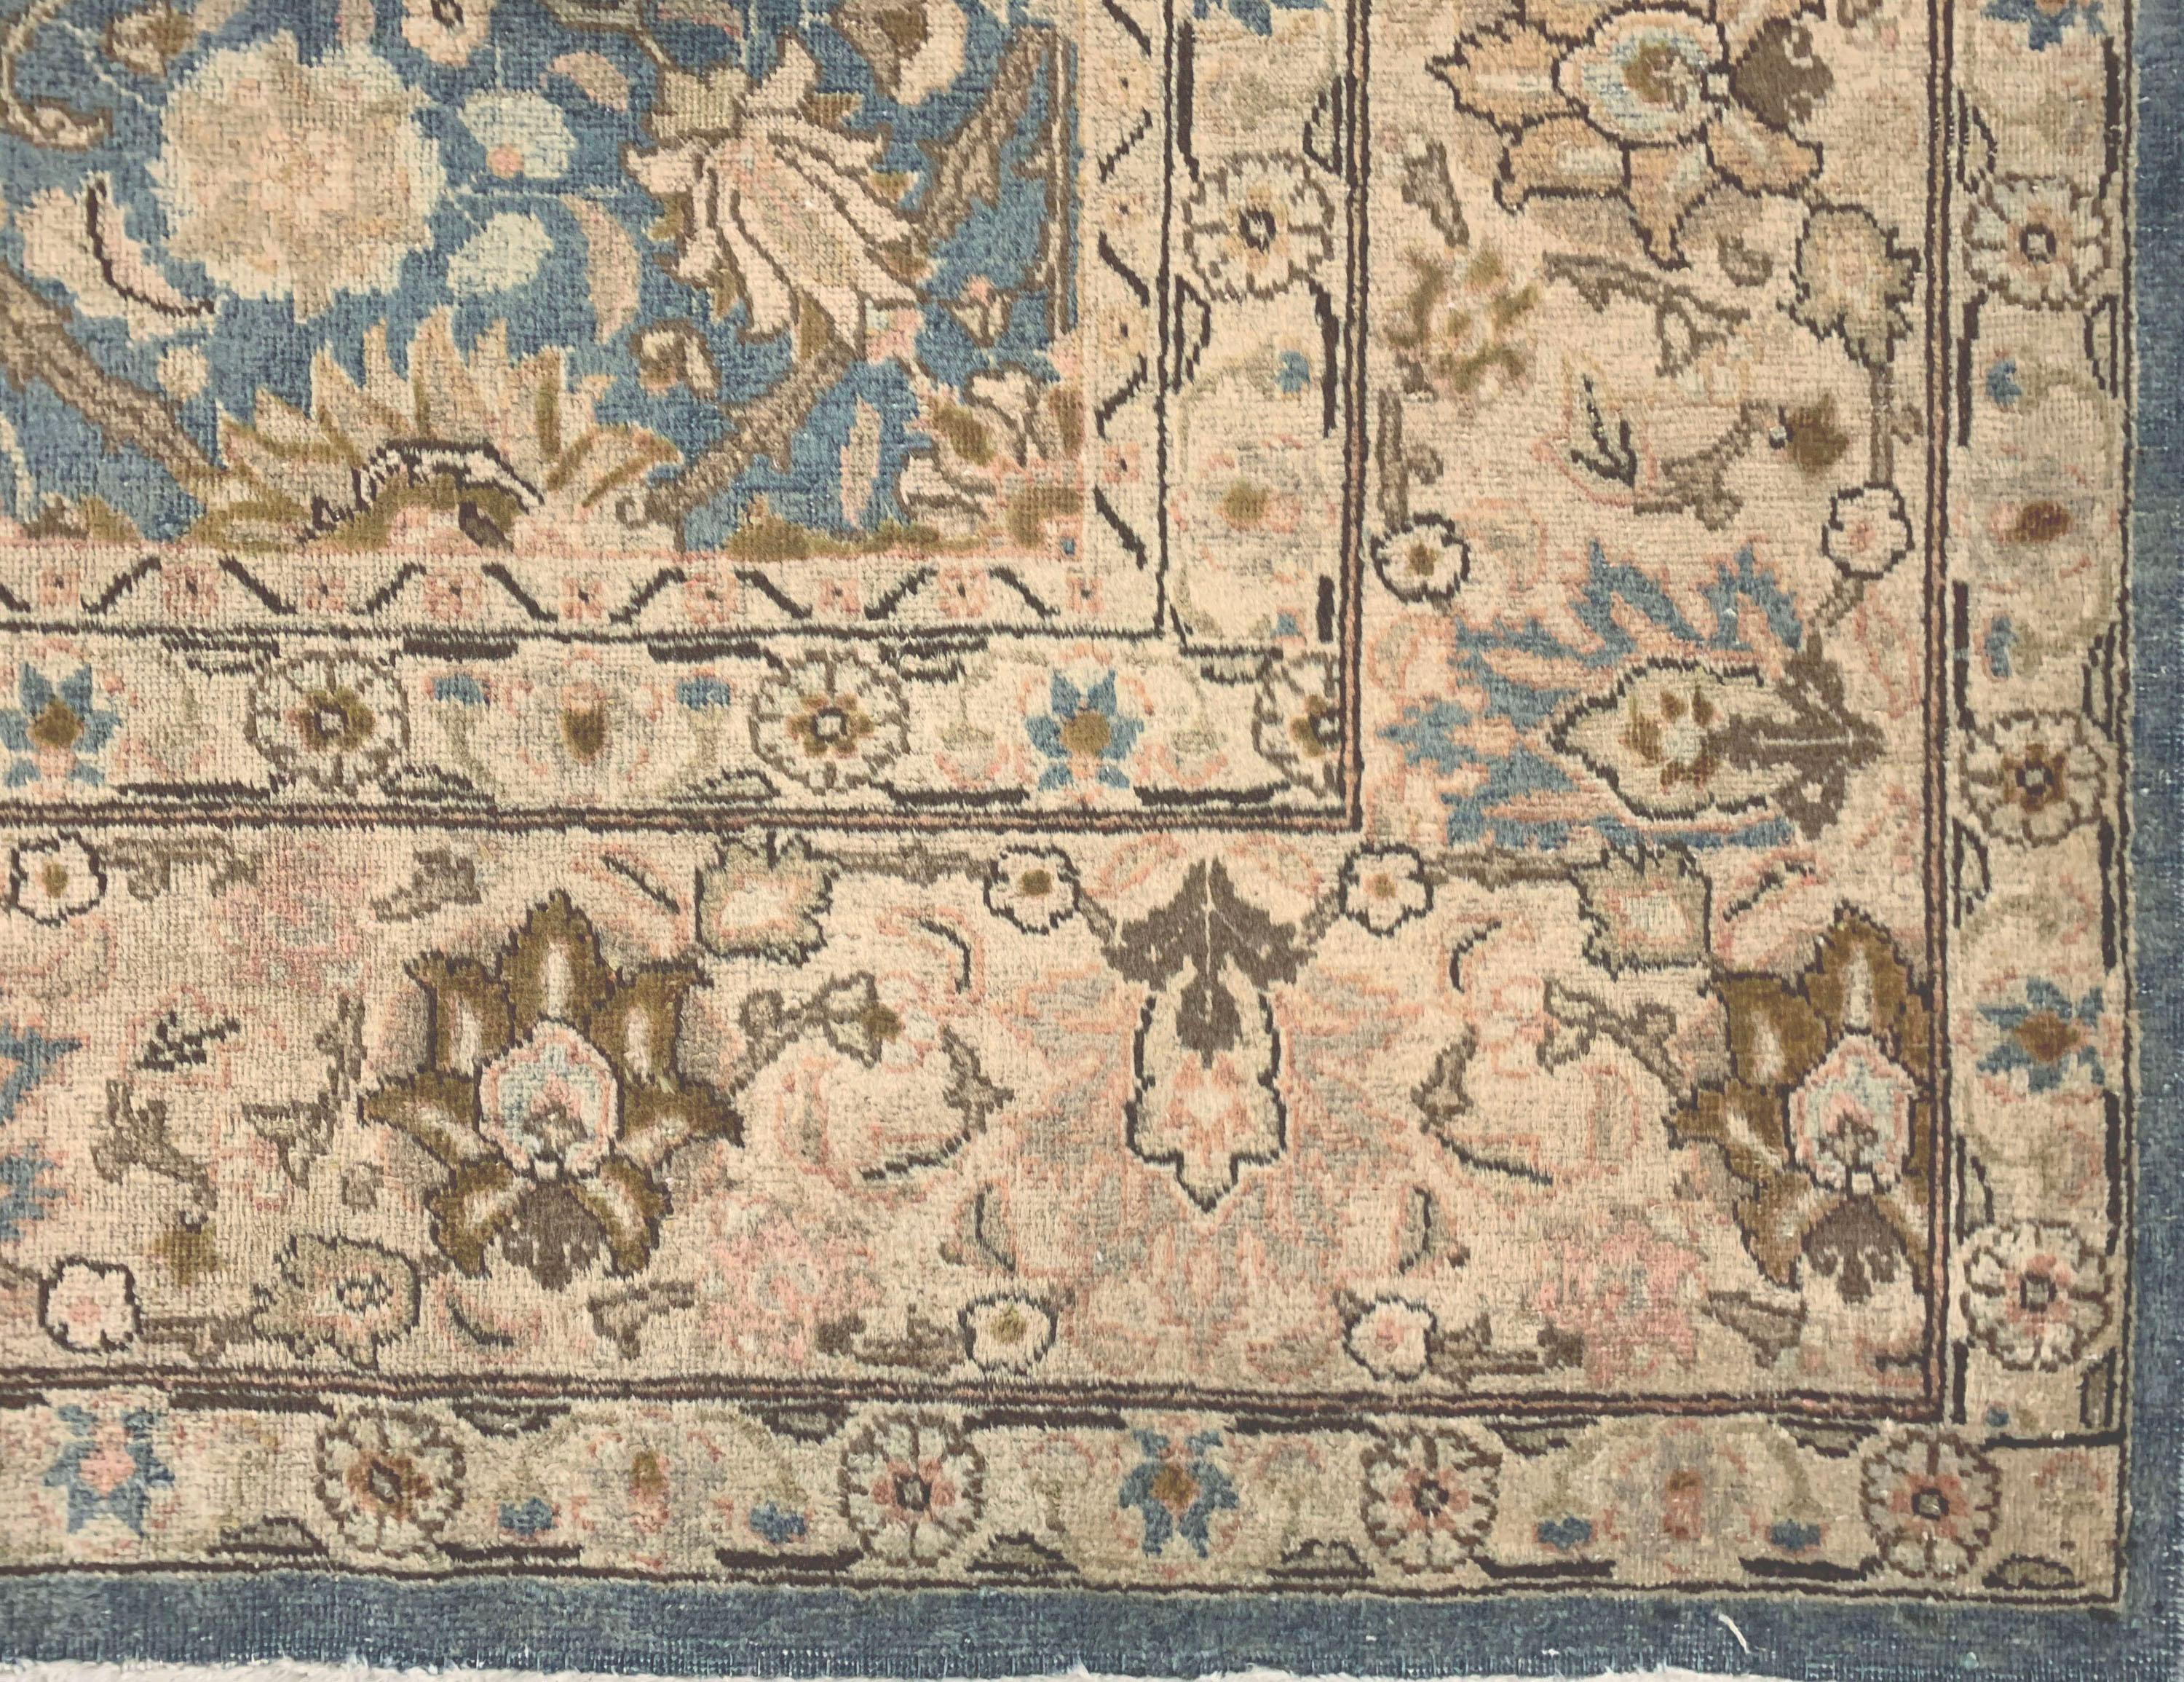 Vintage Persian Tabriz rug, 8'5 x 11'. This highly decorative Tabriz carpet from northwest Persia juxtaposes a mid-blue field (with just a touch of green) with a beige border. The all-over field pattern of palmettes is derived from 17th century